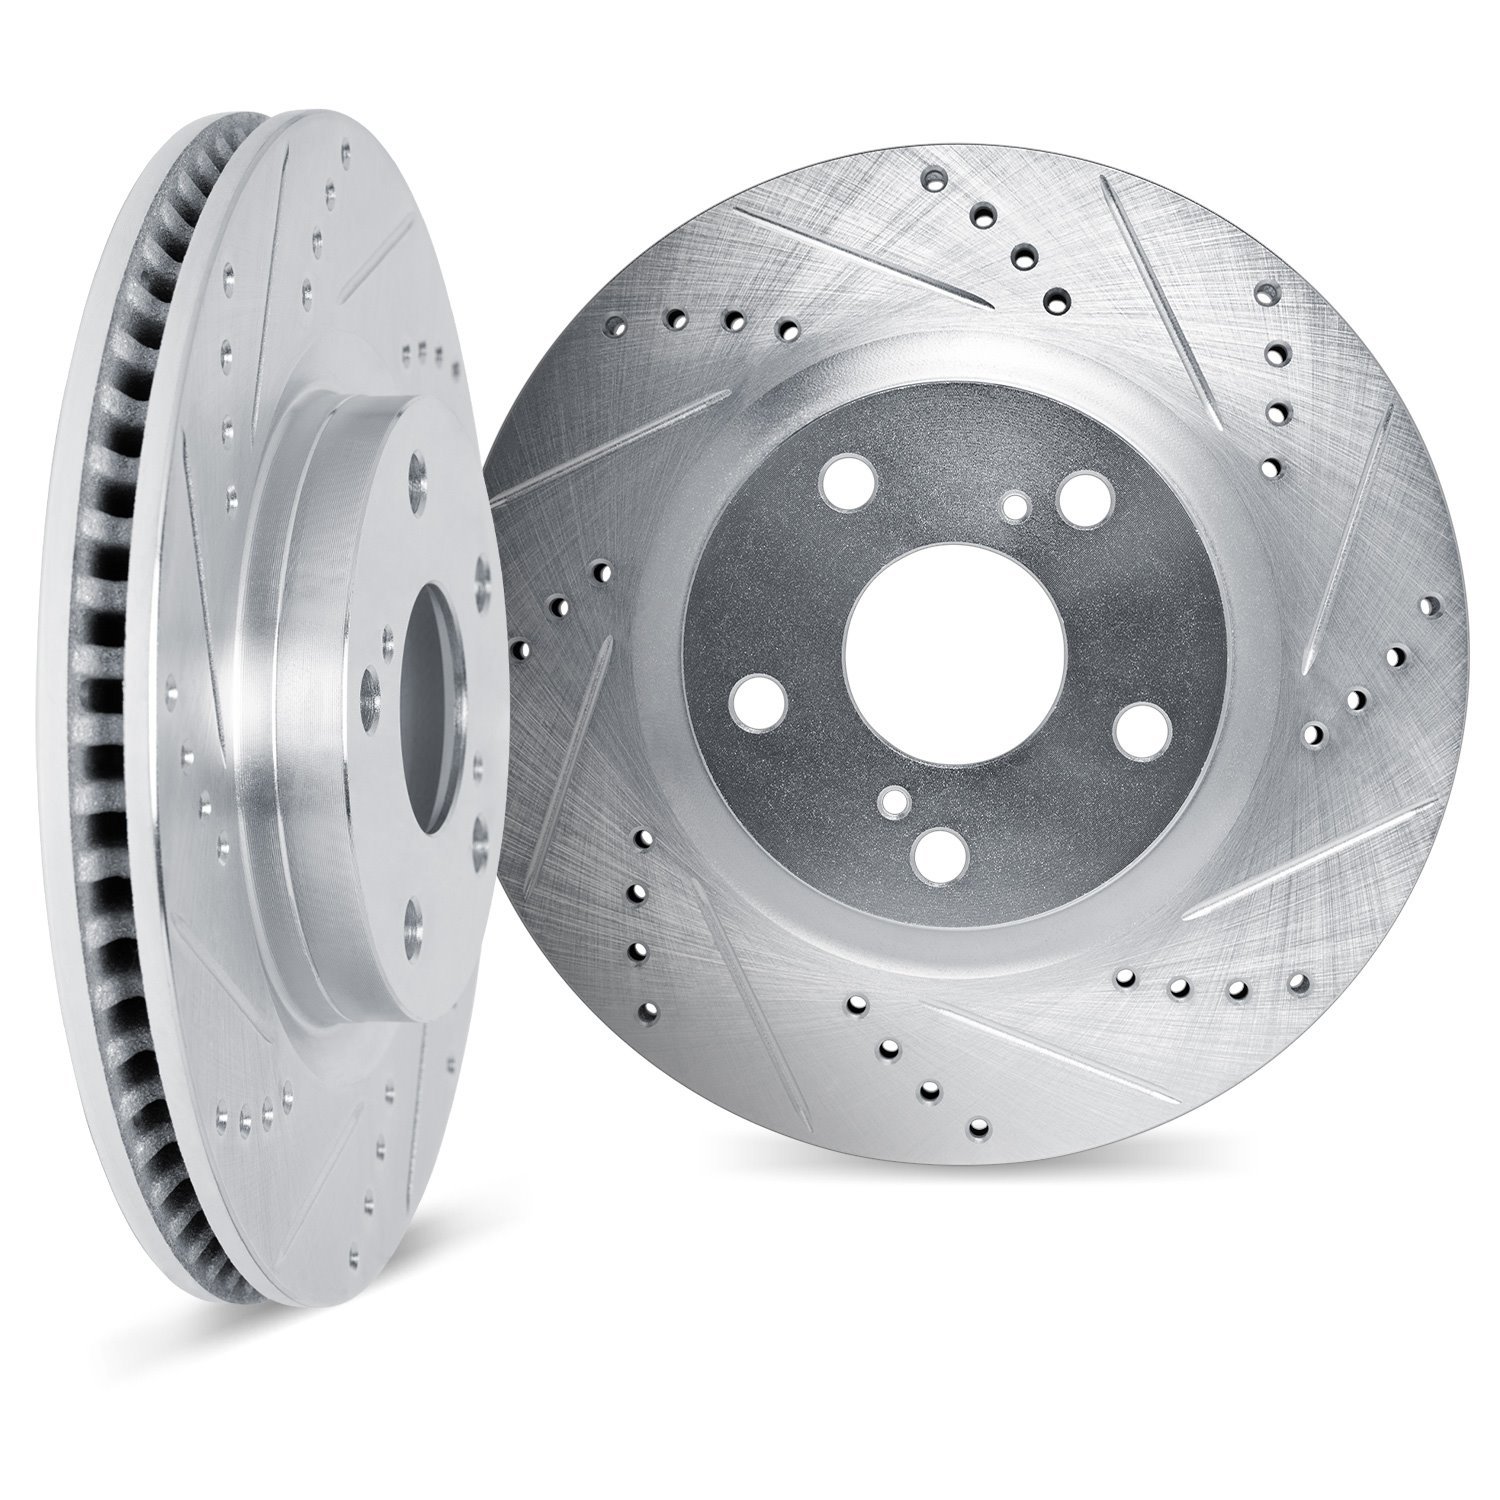 7002-73009 Drilled/Slotted Brake Rotors [Silver], 1998-2009 Audi/Volkswagen, Position: Front